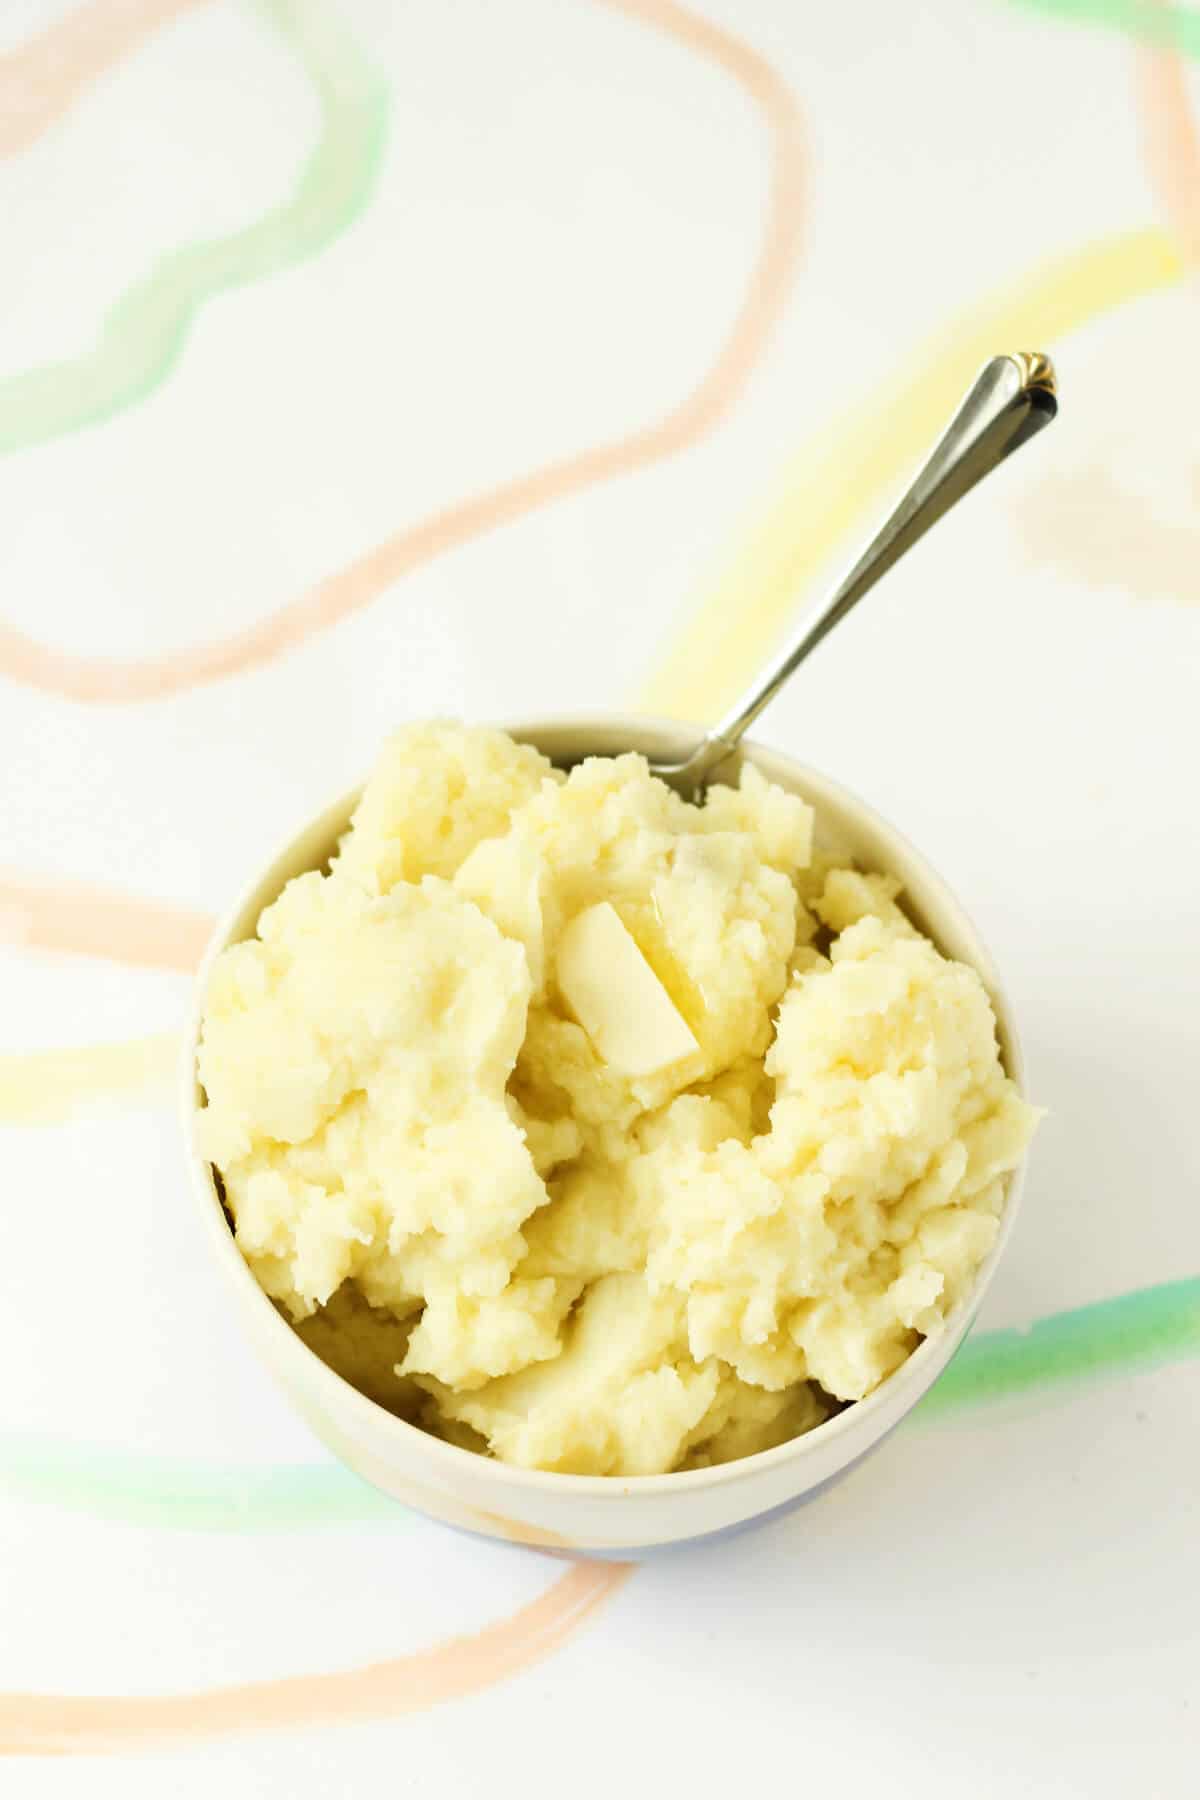 White bowl filled with yellow-y mashed potatoes topped with a pat of melty butter. There's a metal spoon sticking out of the bowl.